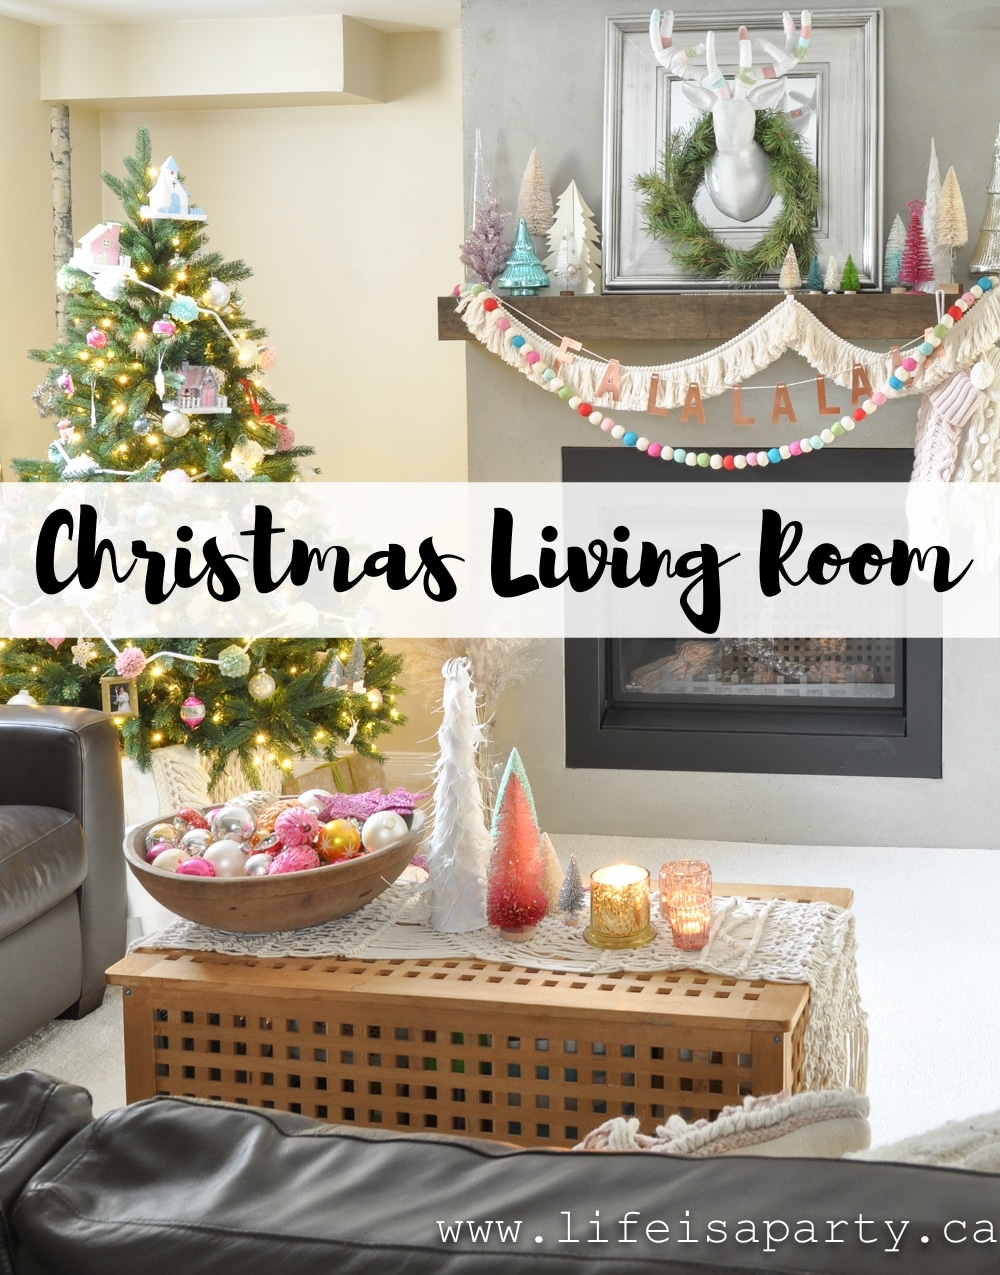 Colourful Pastel Christmas Family Room: Inspired by Anthropologie, with bottle brush Christmas trees, mercury glass, vintage ornaments, macrame, & pastel colours.